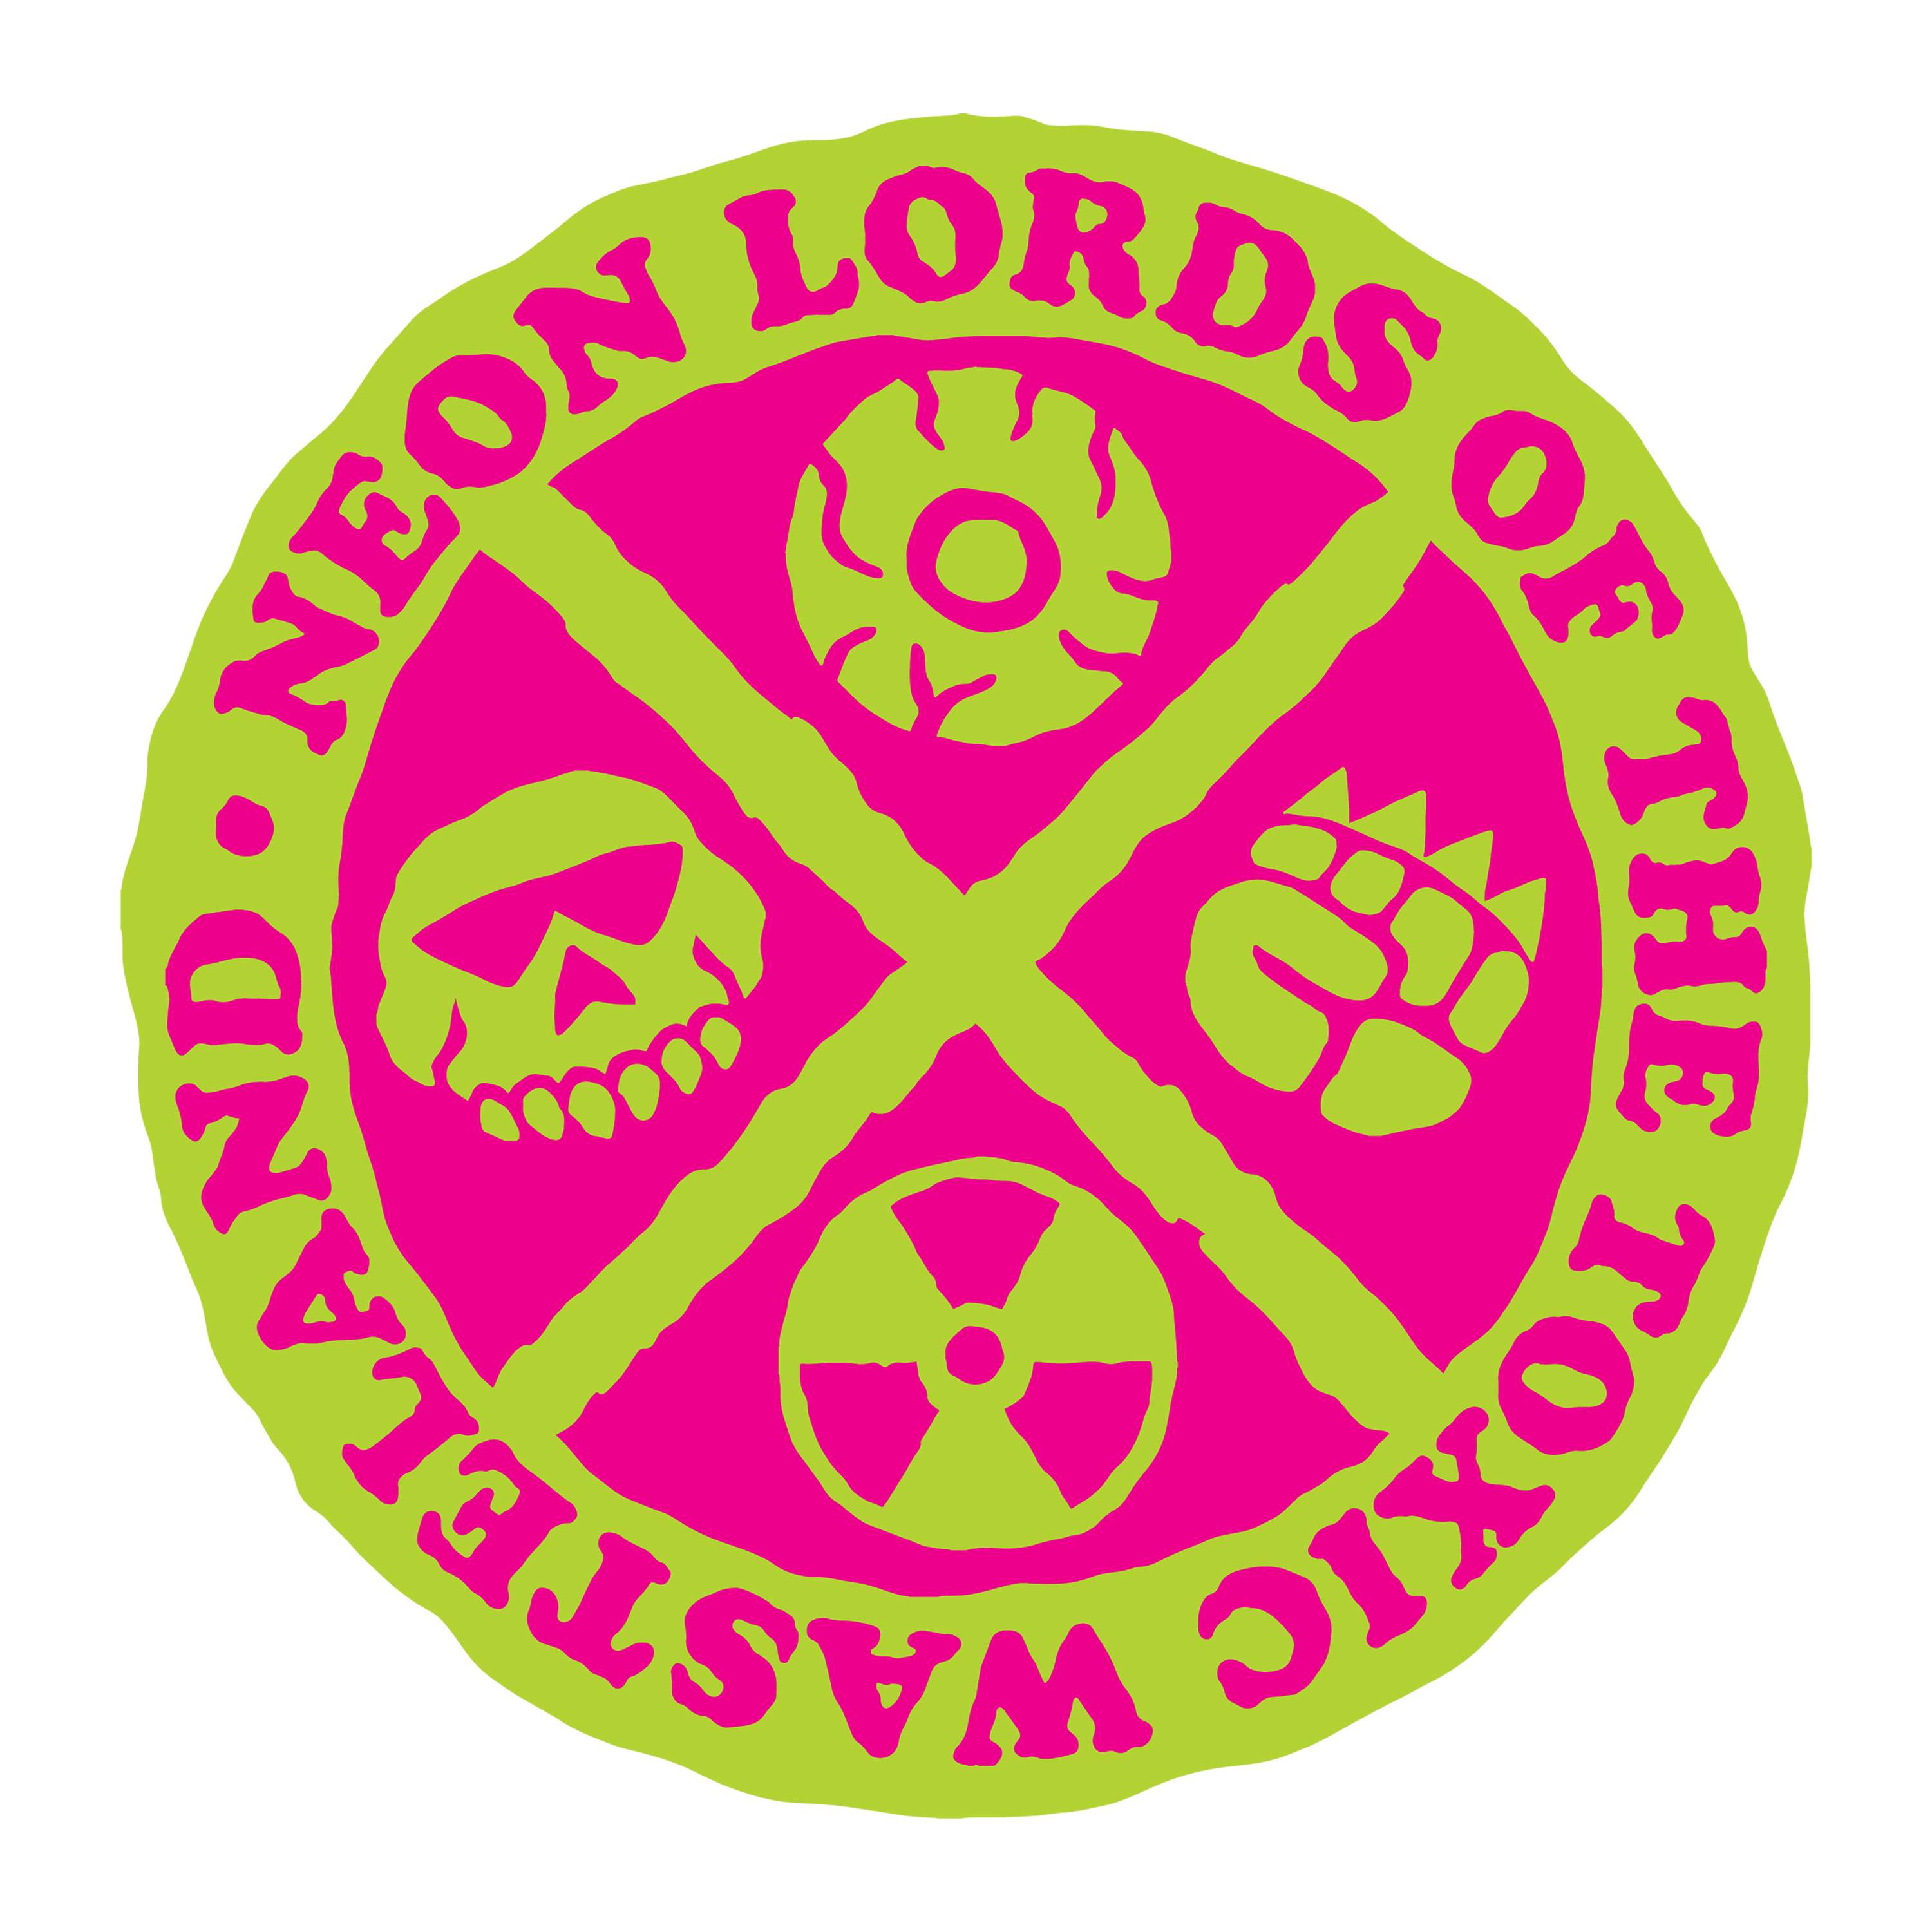 Discussing The Neon Lords of the Toxic Wasteland RPG with Brian Shutter